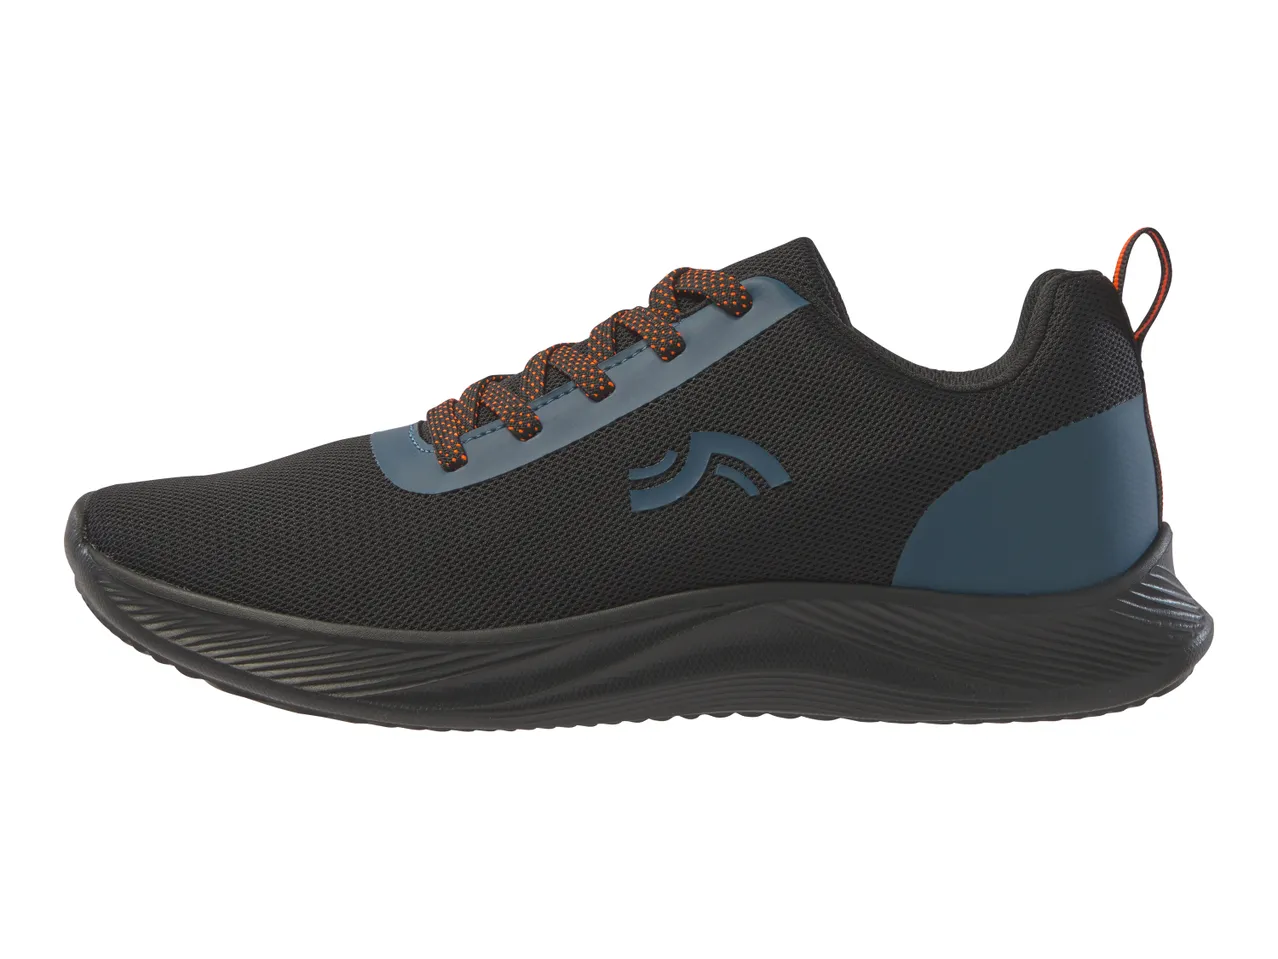 Go to full screen view: Crivit Men’s Trainers - Image 11